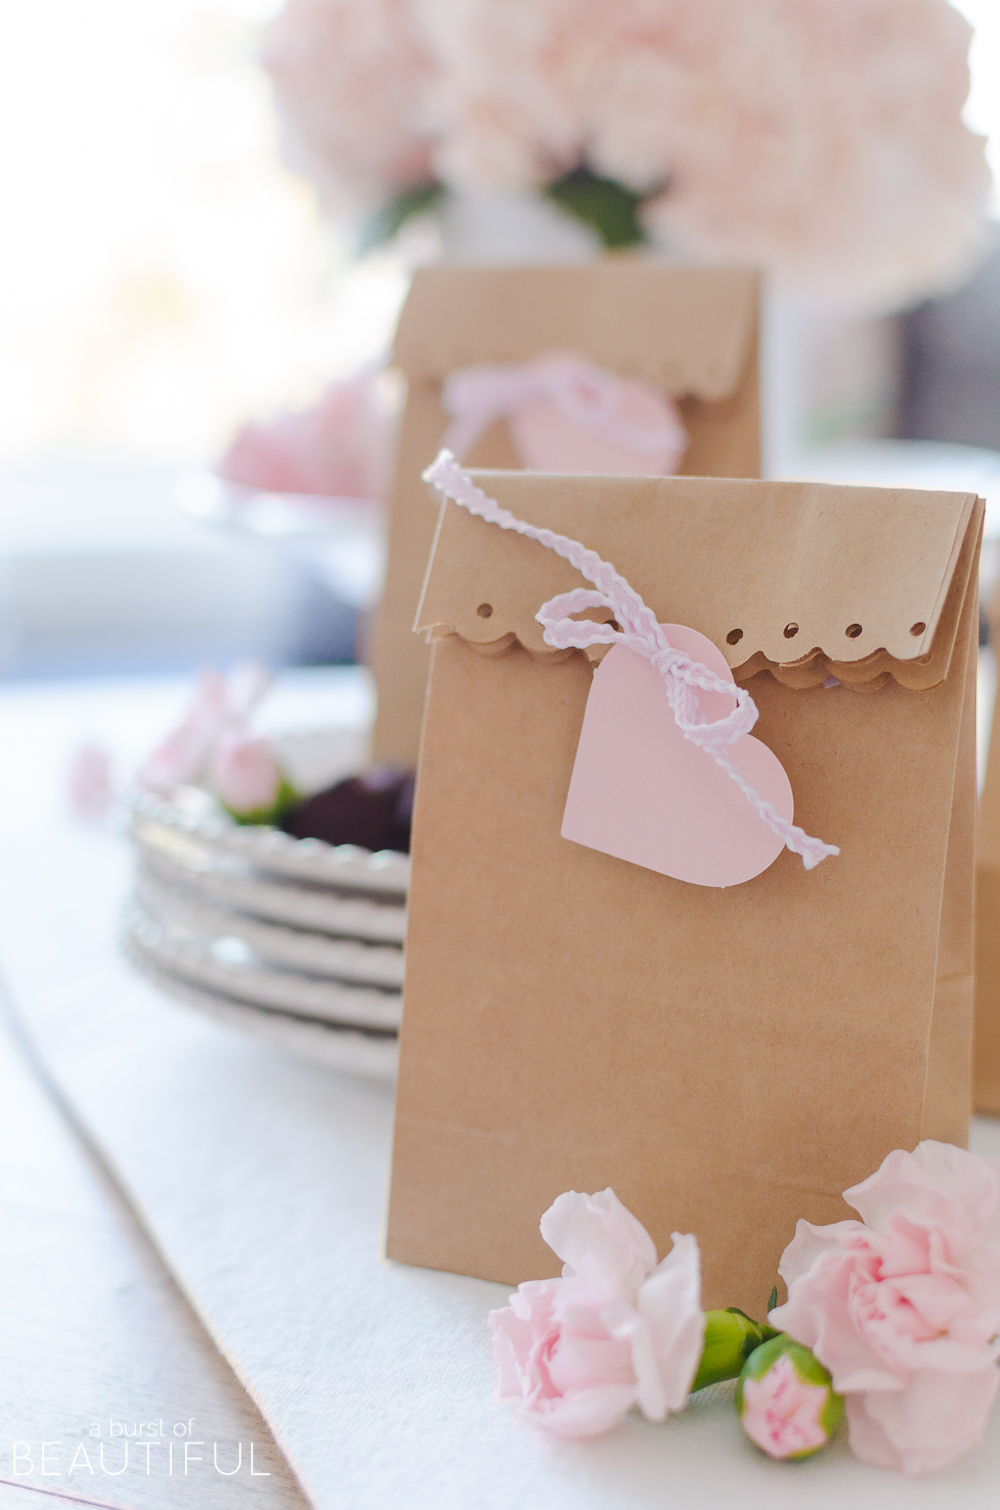 These homemade Valentine's Day Party Favors are easy to make and will brighten anyone's day!